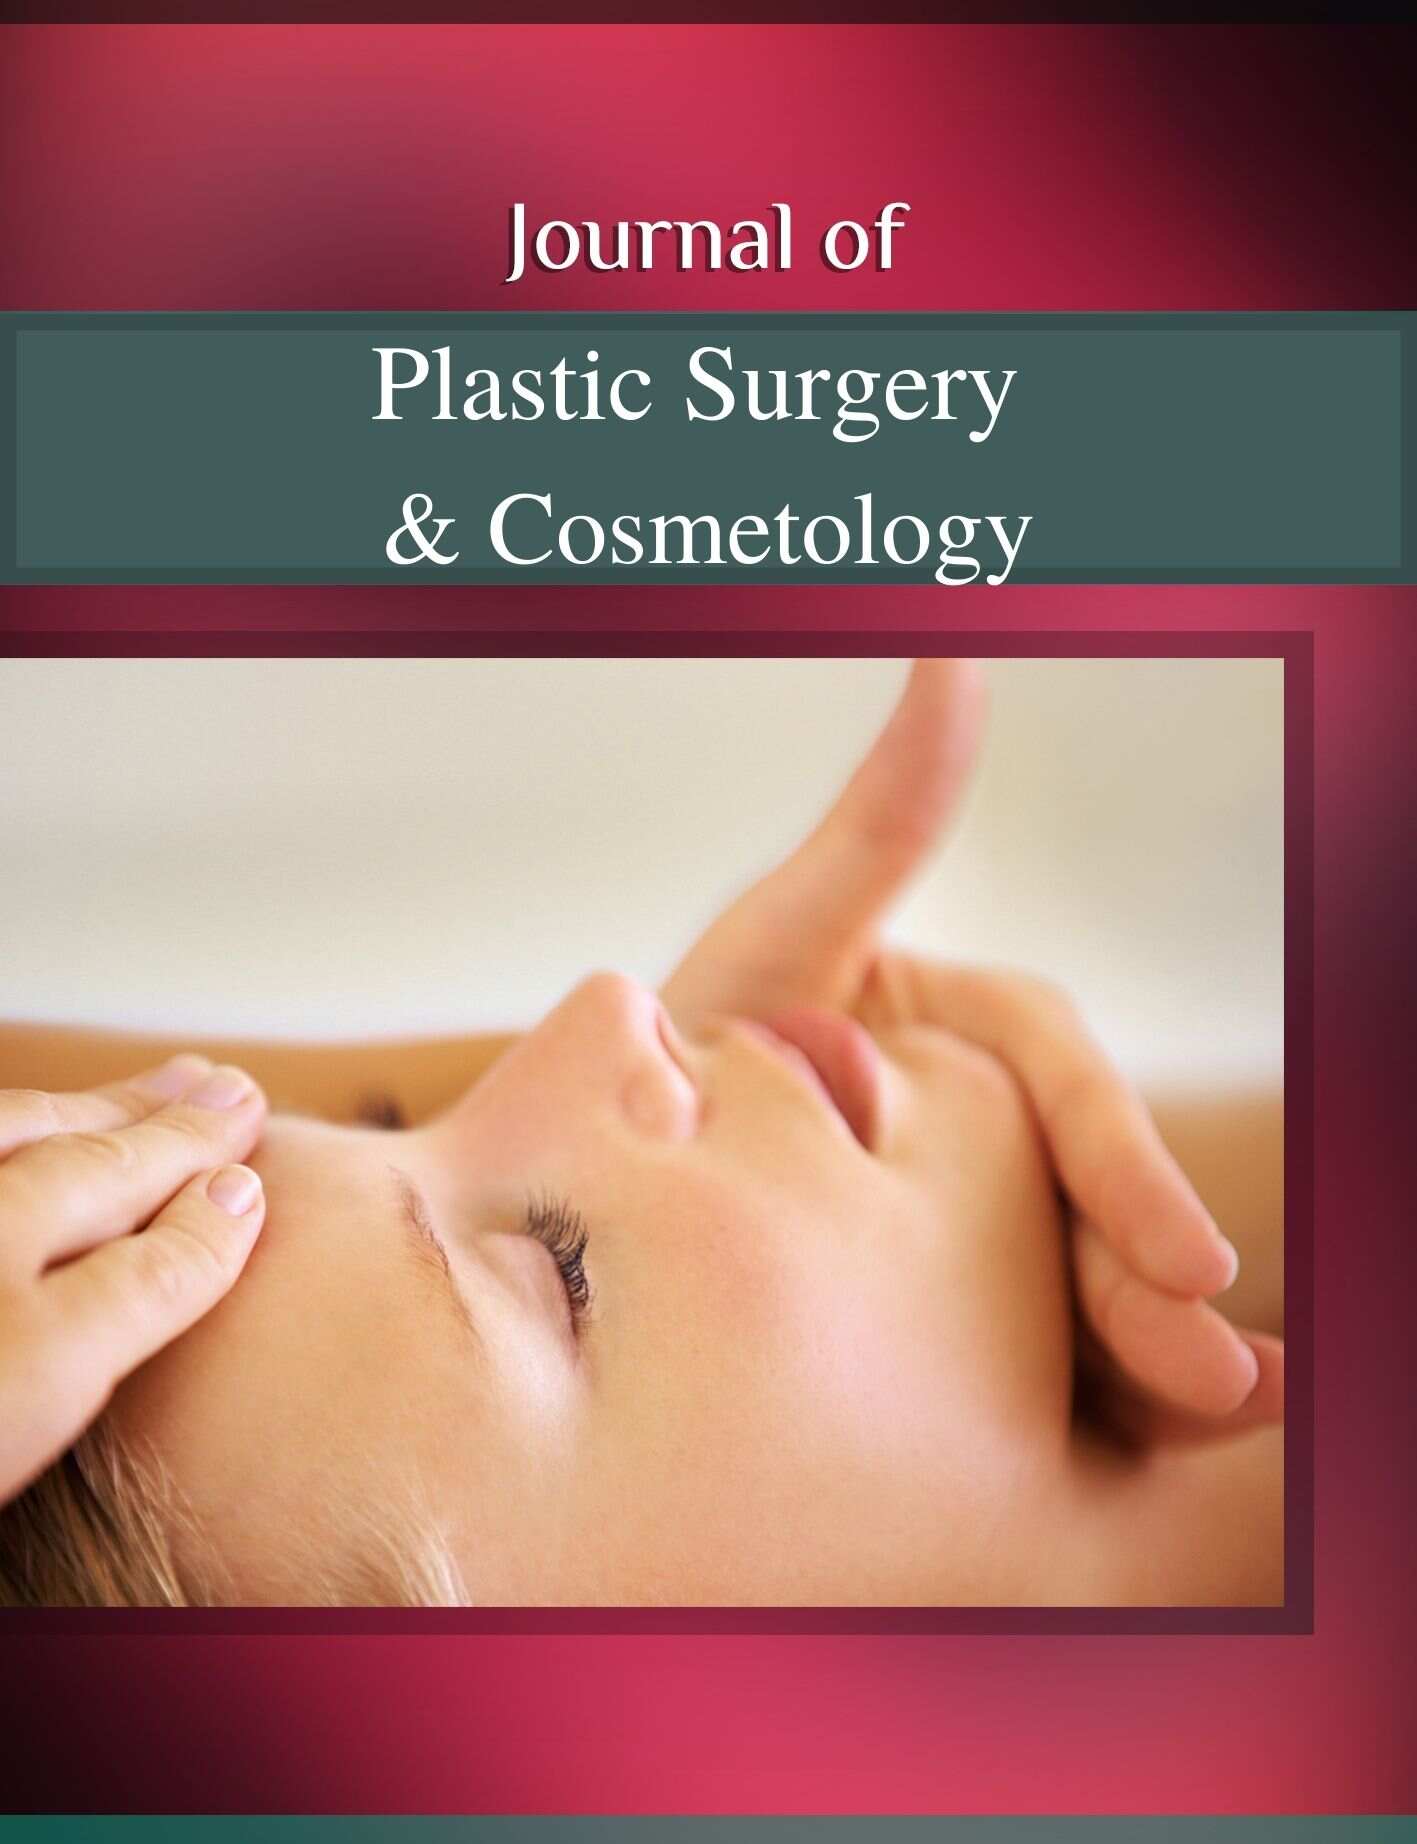 Journal of Plastic Surgery & Cosmetology